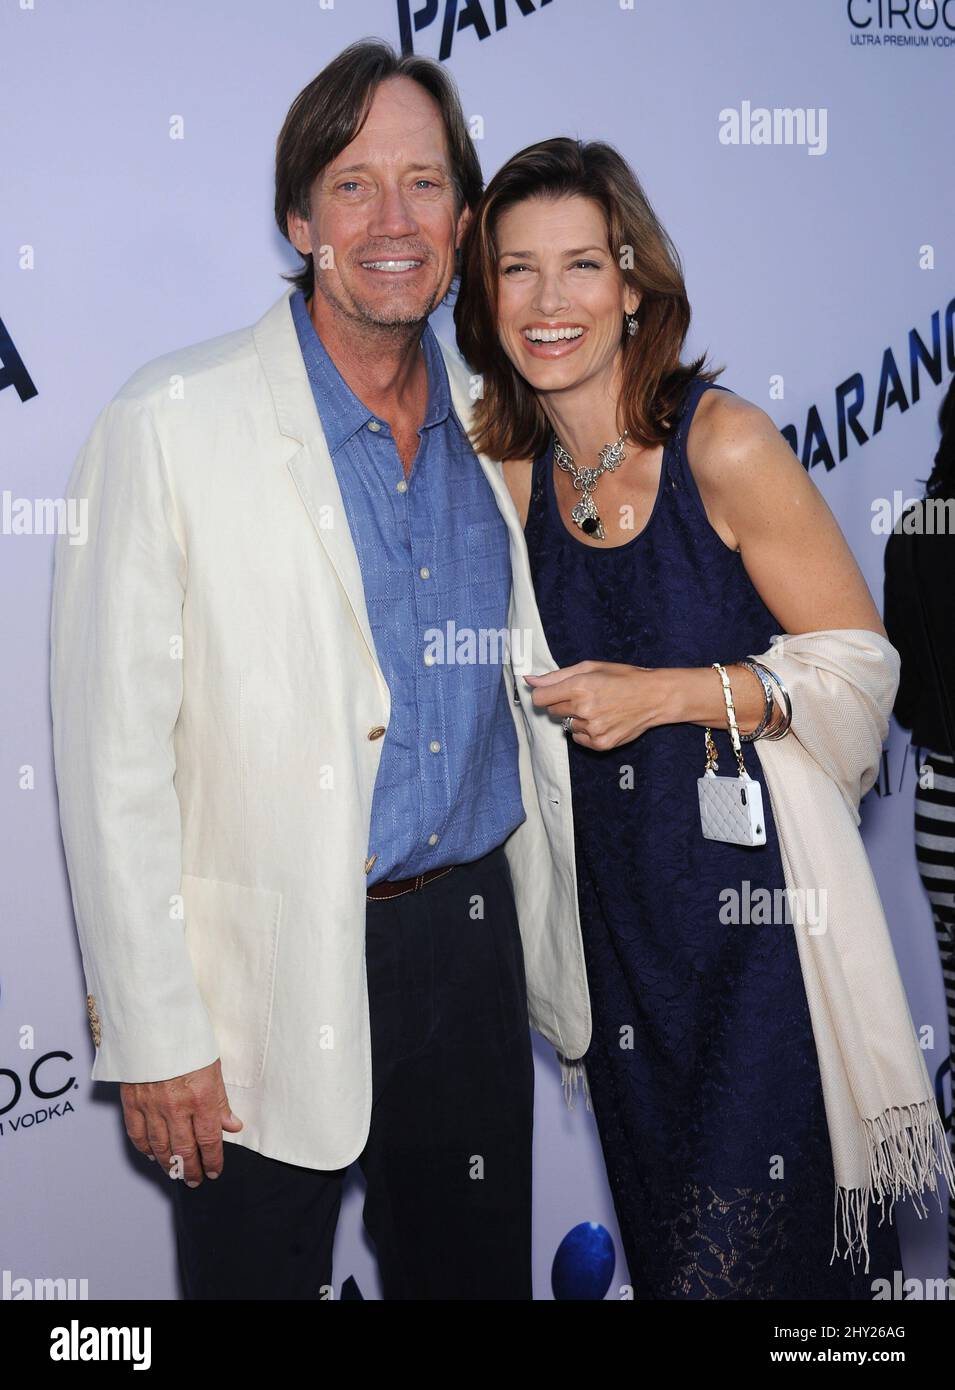 Kevin Sorbo & Sam Jenkins attends the 'Paranoia' US premiere held at the Directors Guild of America, Los Angeles. Stock Photo